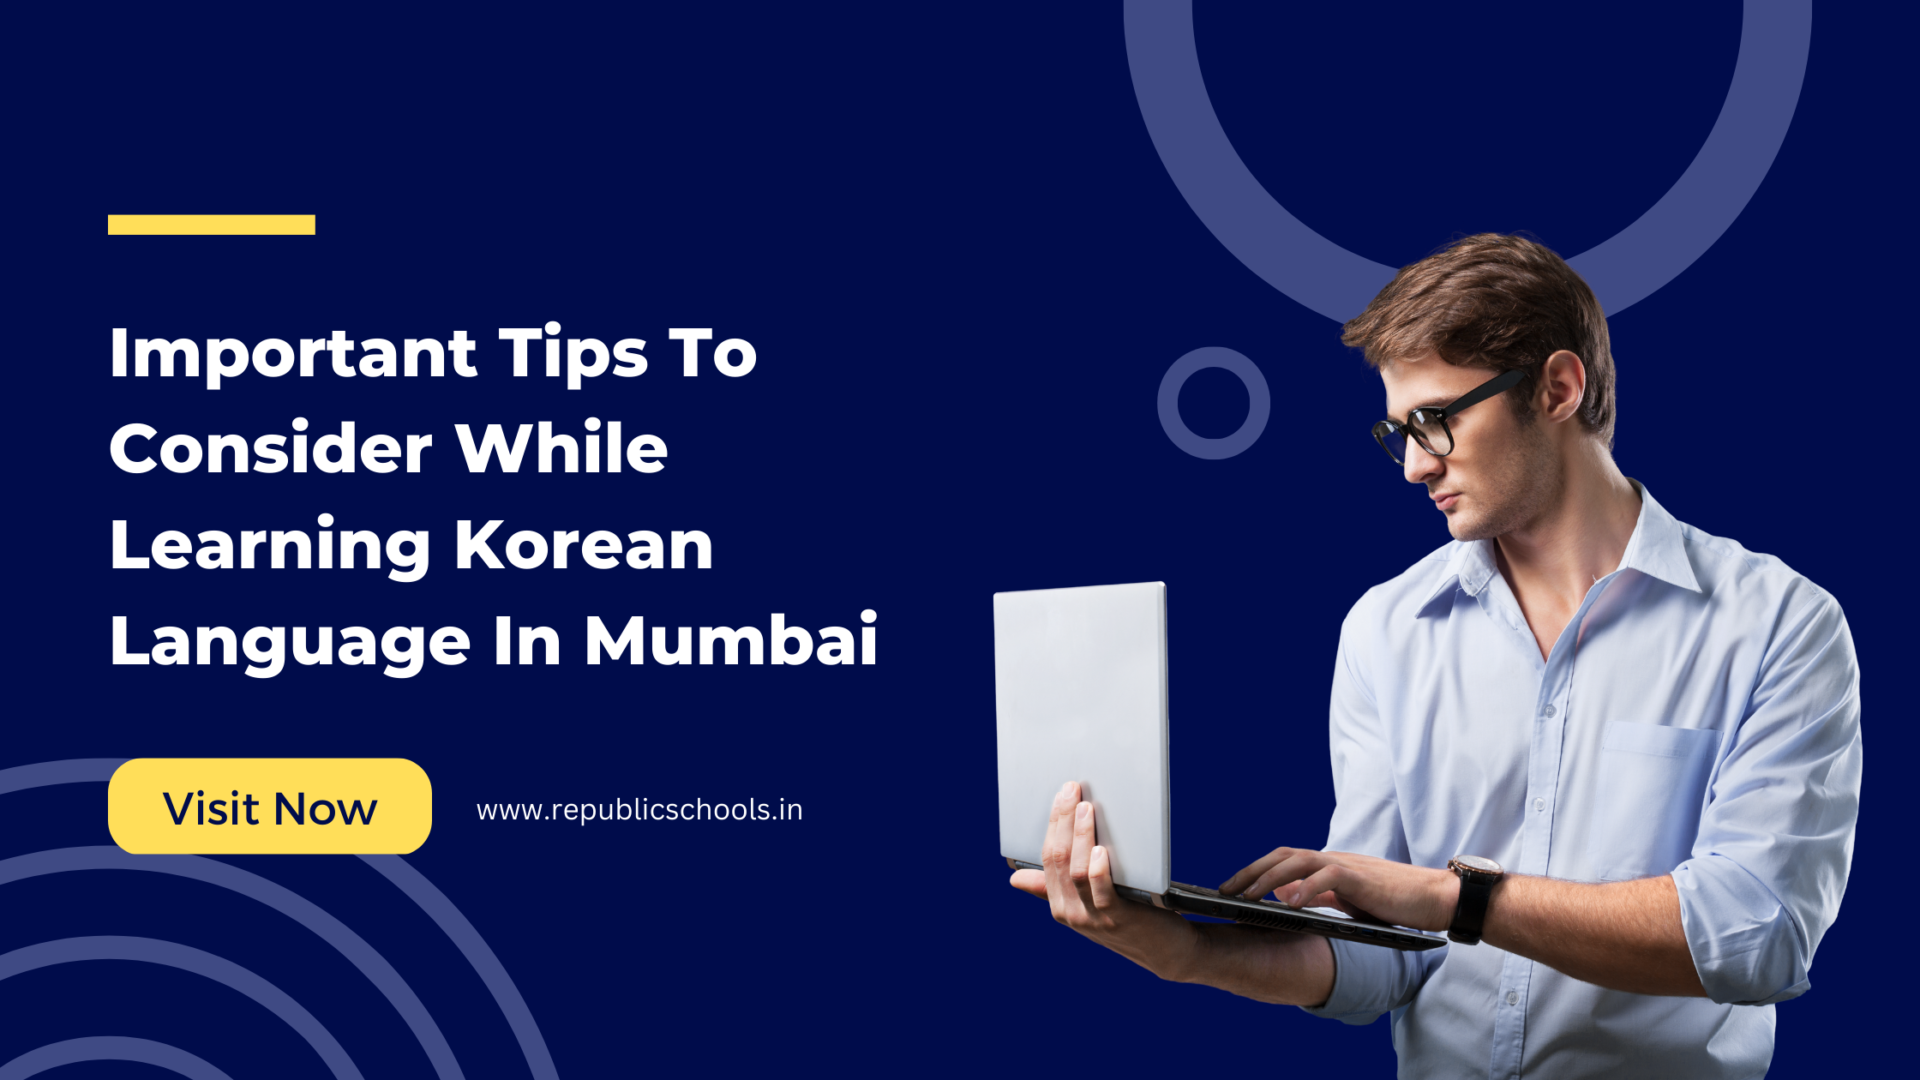 Important Tips To Consider While Learning Korean Language In Mumbai